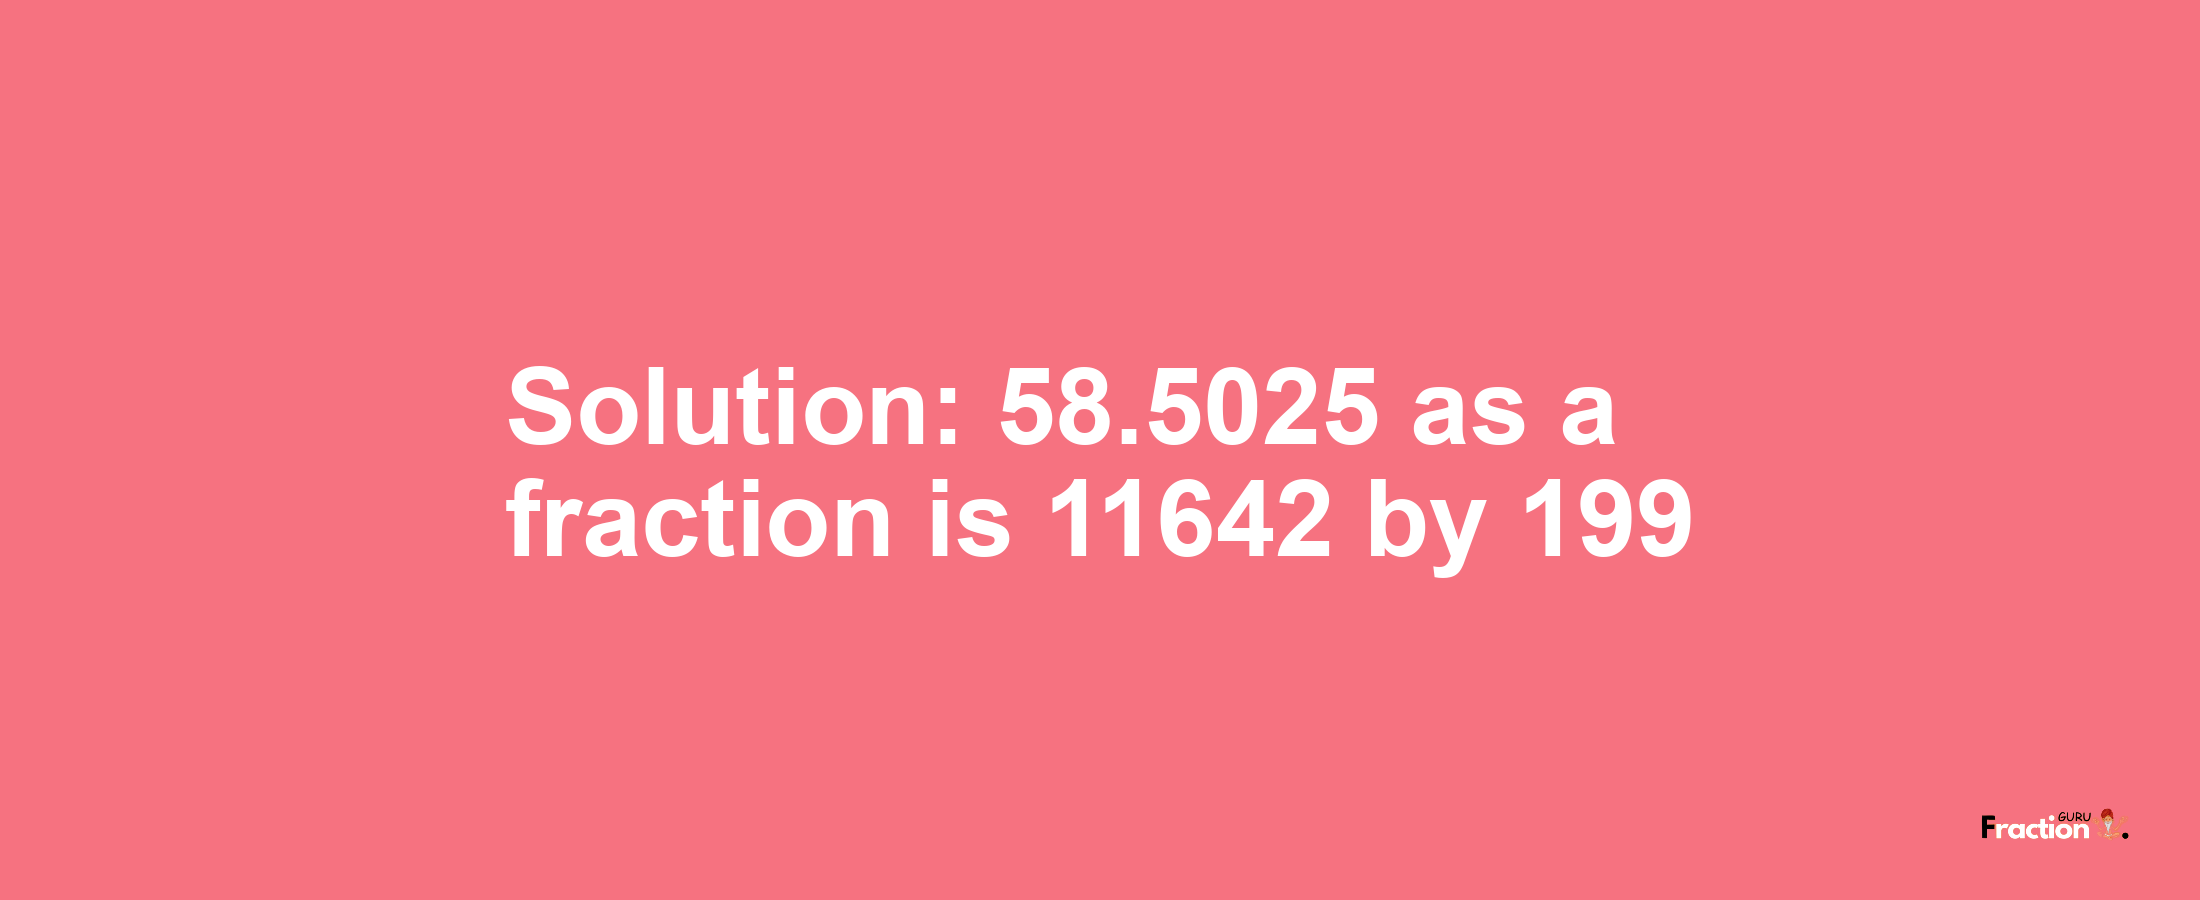 Solution:58.5025 as a fraction is 11642/199